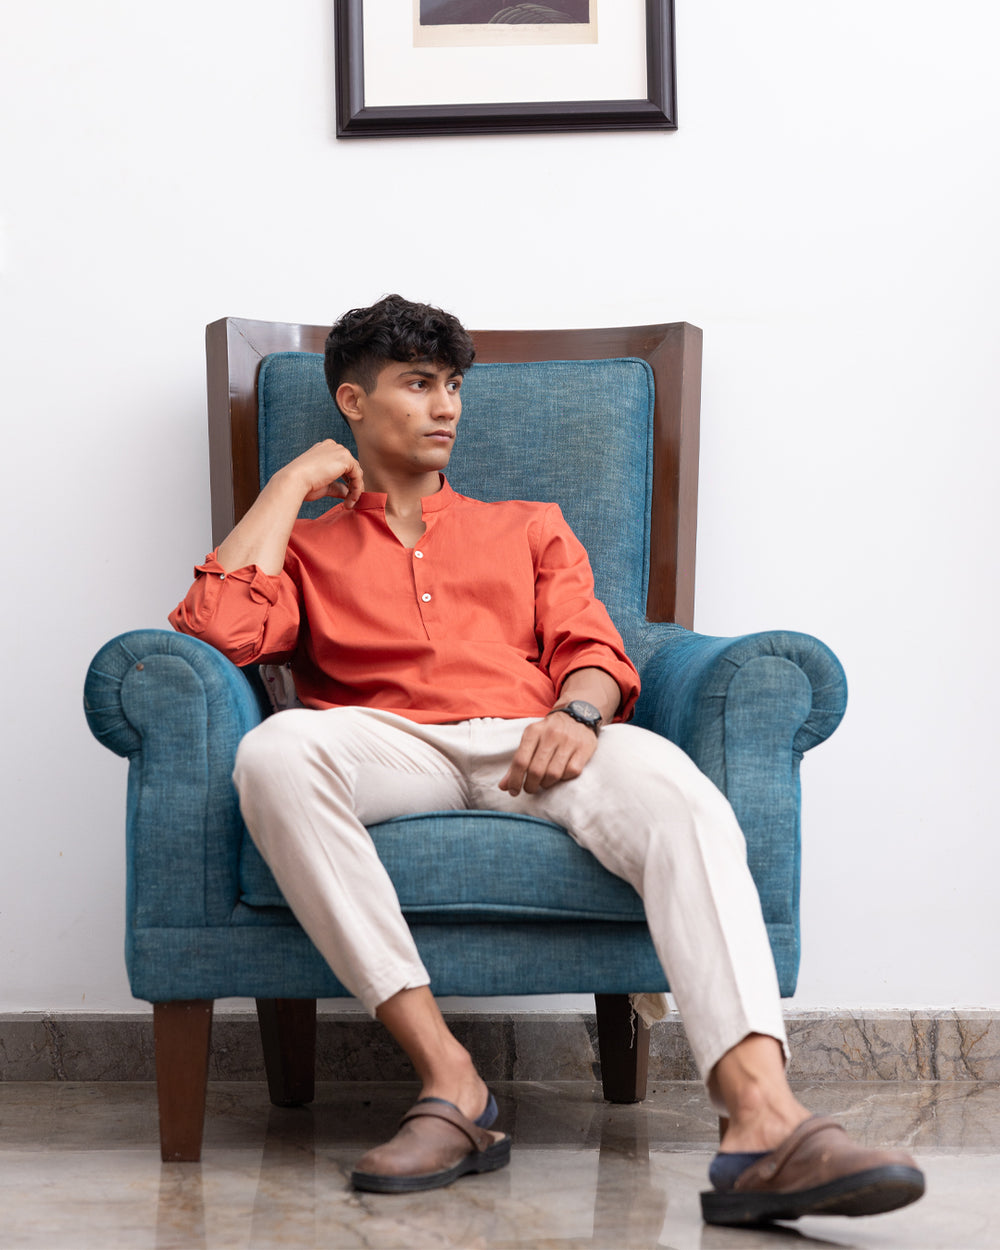 A young man with curly hair is standing indoors, wearing a Scarlatto - Short Kurta and beige pants. He is looking to his right with his left hand in his pocket. Behind him are a teal armchair, a framed picture on the wall, and a bookshelf with several books.